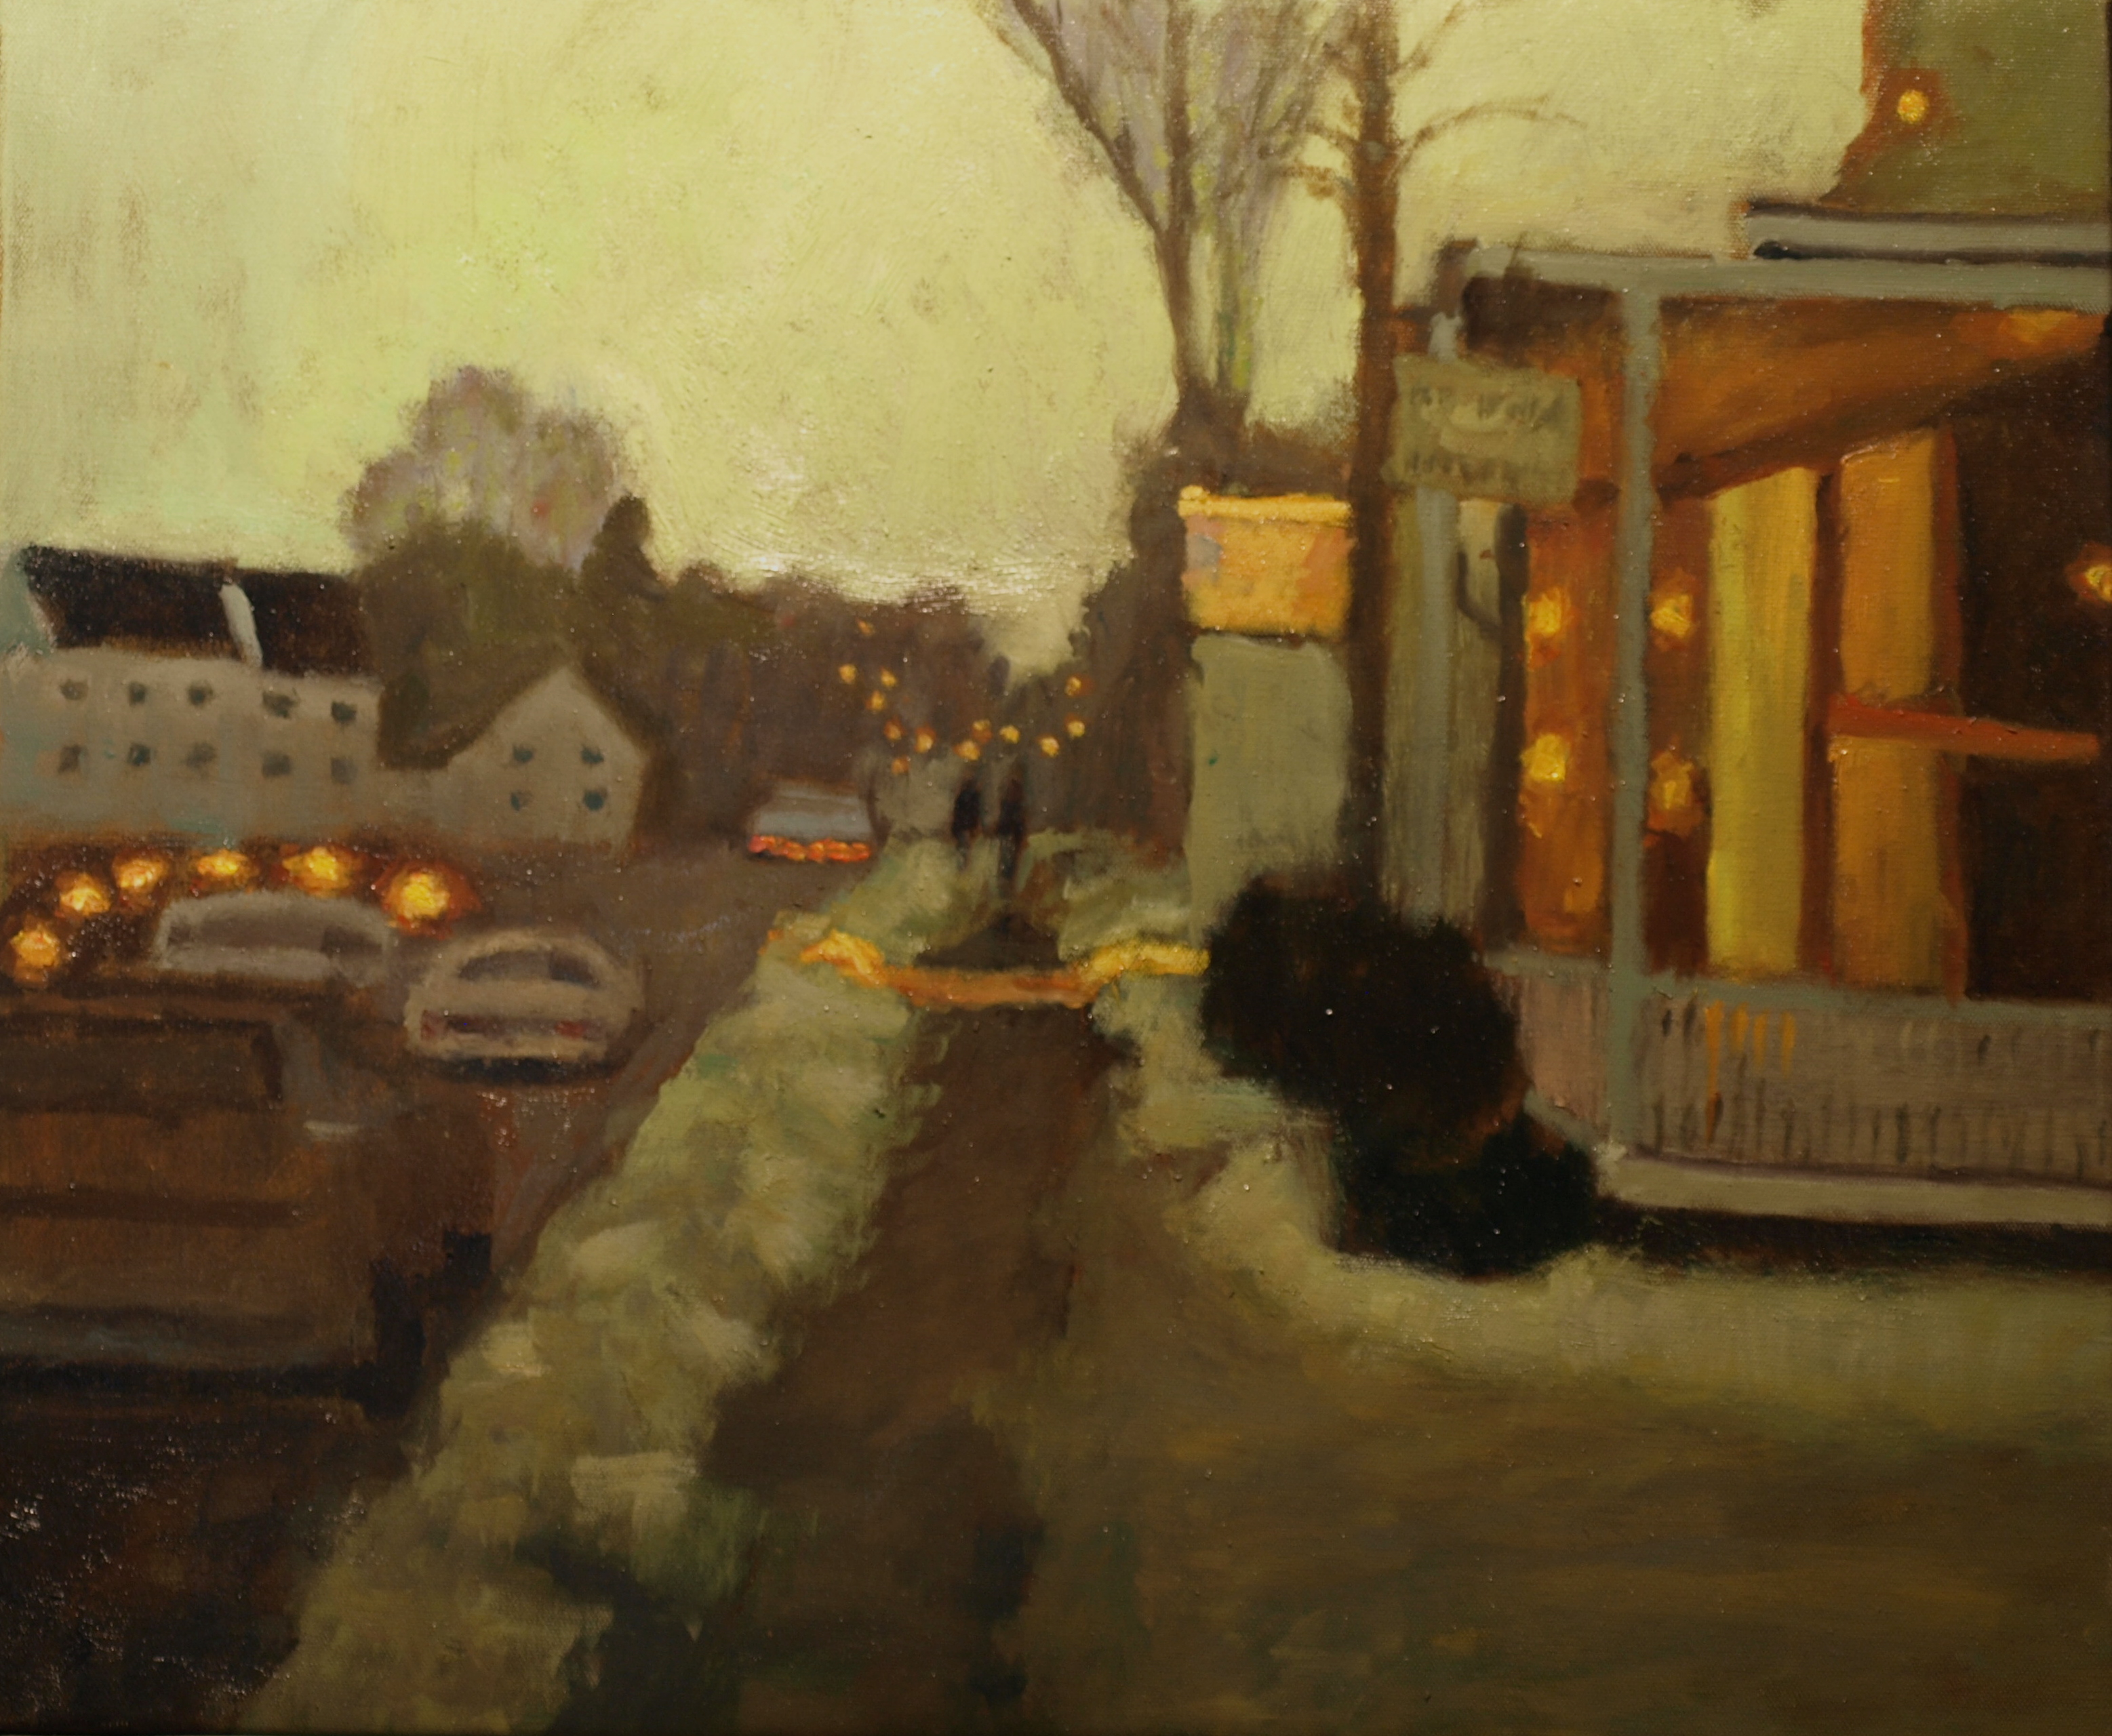 Winter Evening in Kent, Oil on Canvas, 20 x 24 Inches, by Richard Stalter, $650